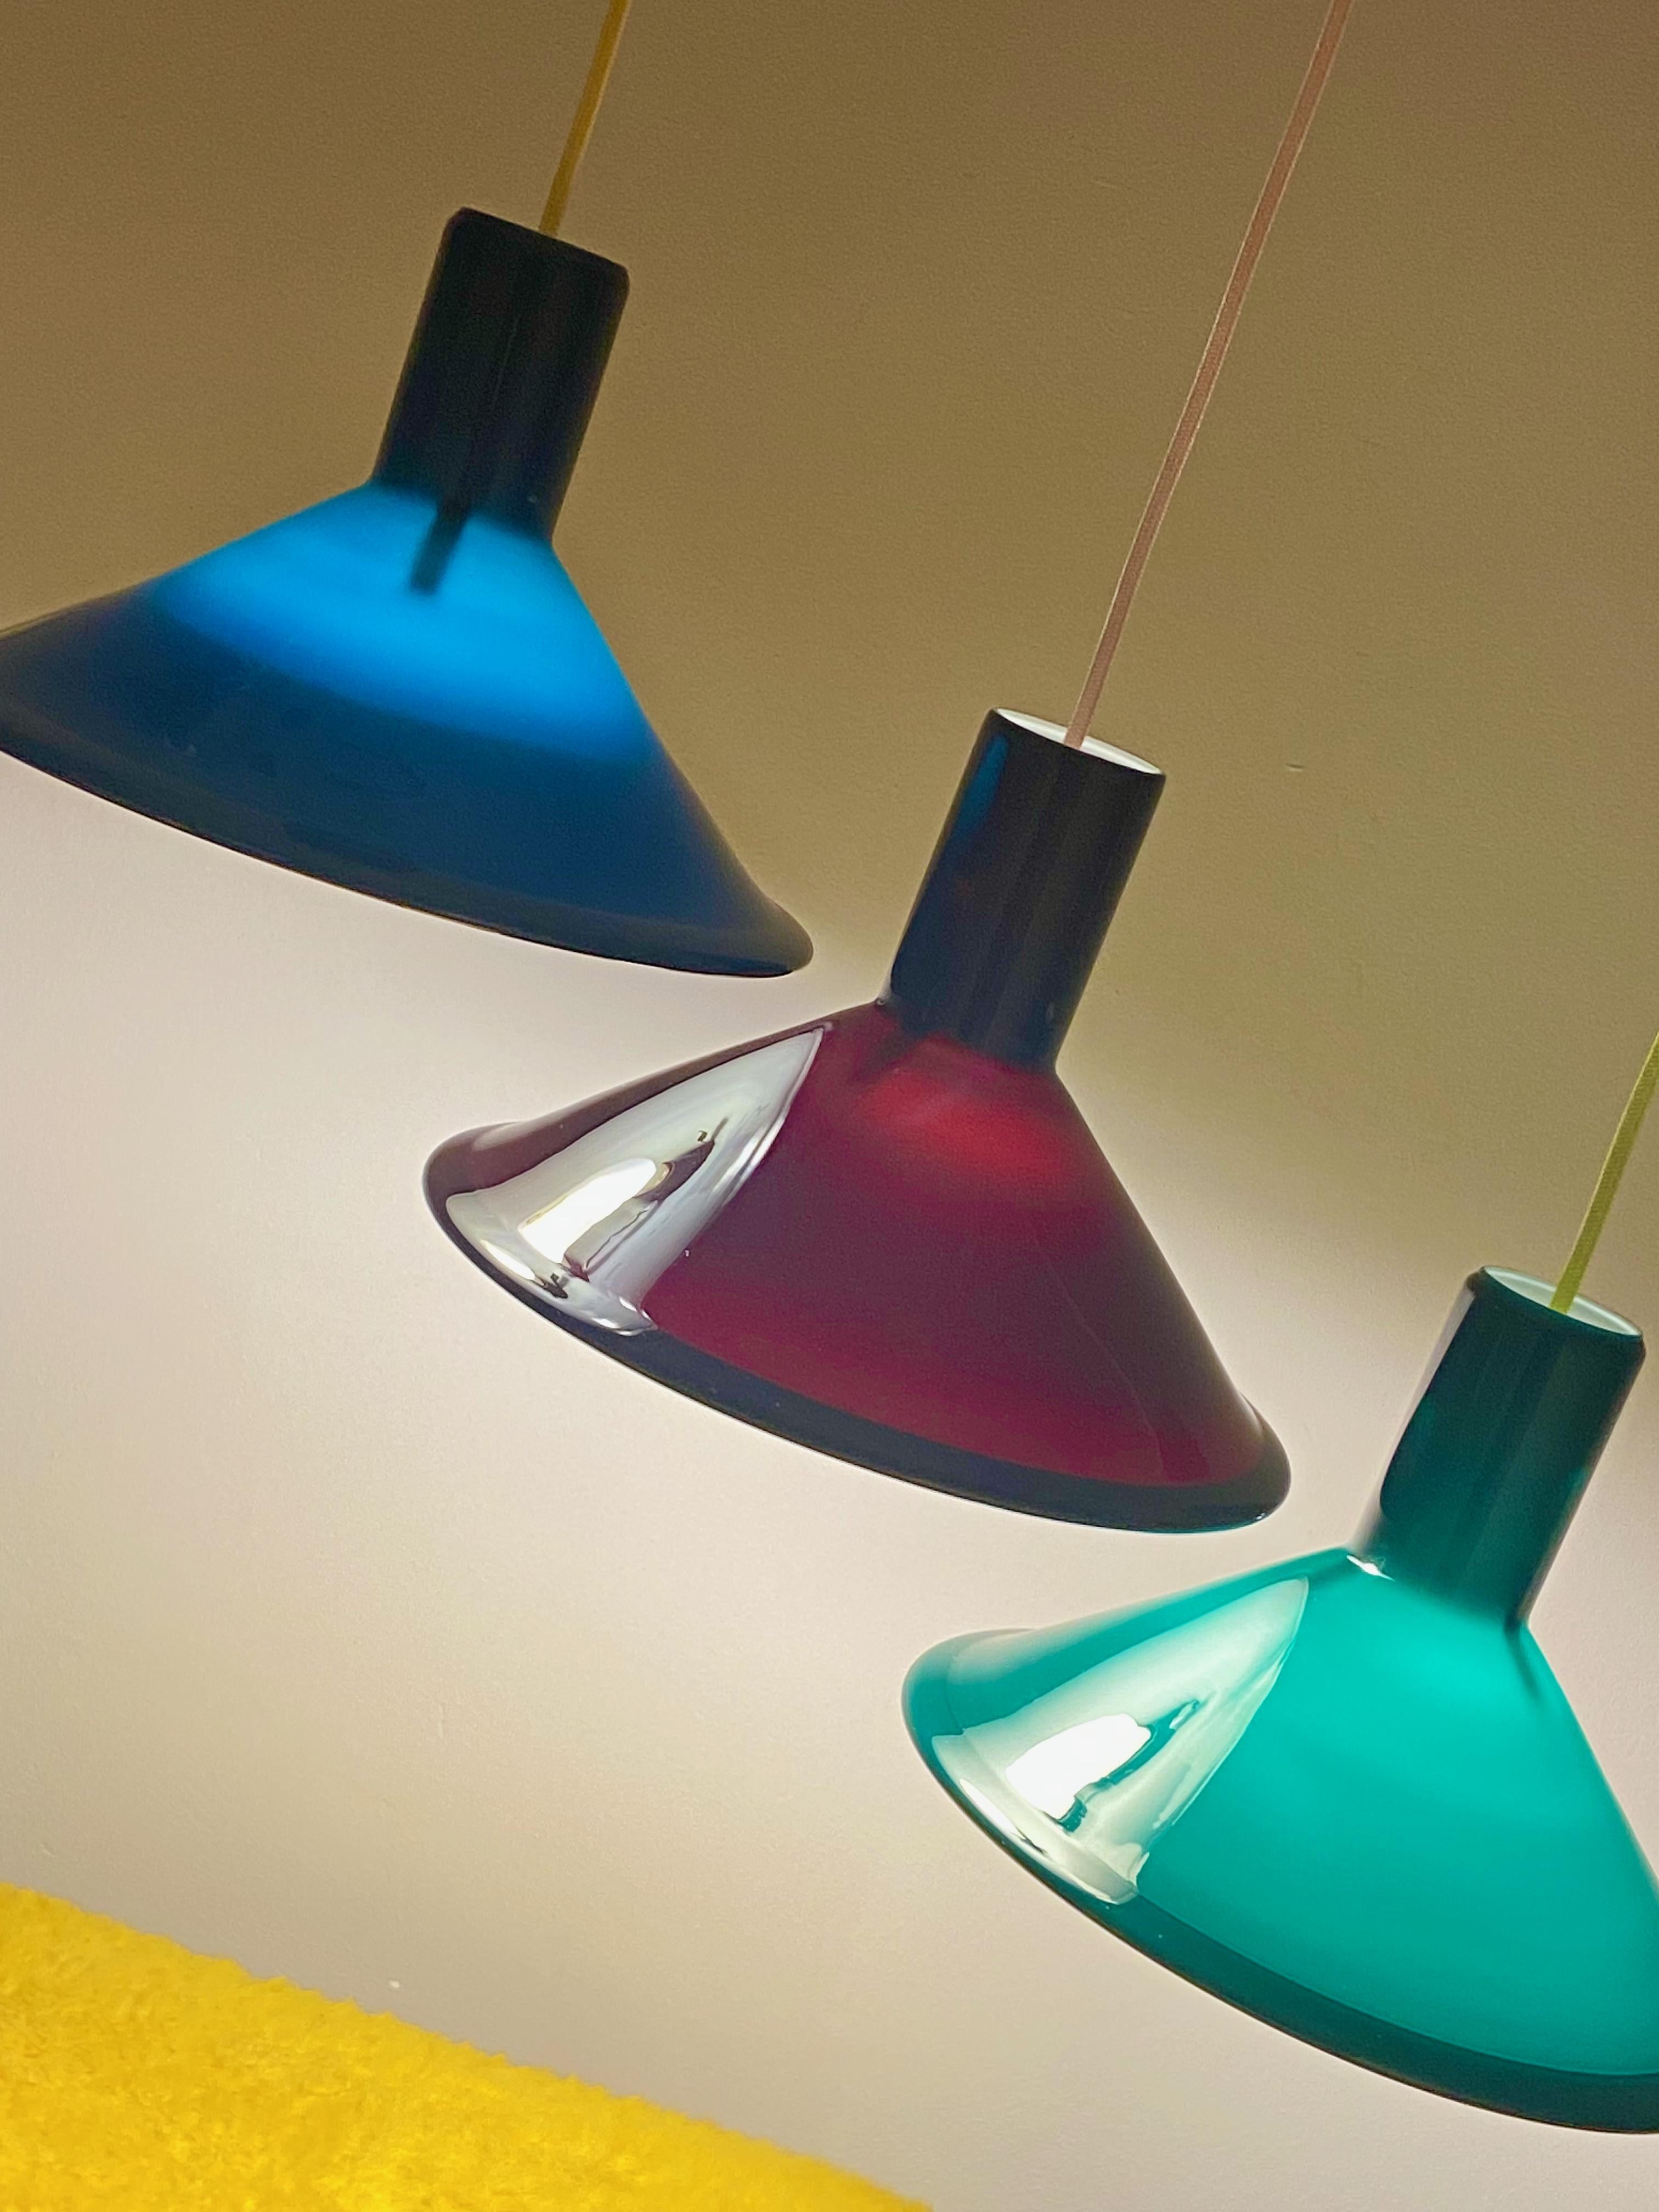 P&T pendant lamp designed by Michael Bang for Holmegaard in the 1970s. This Danish lamp is made of opaline glass and is dark green on the outside and white on the inside. The lamp is in very good condition, no damages and comes with neon yellow